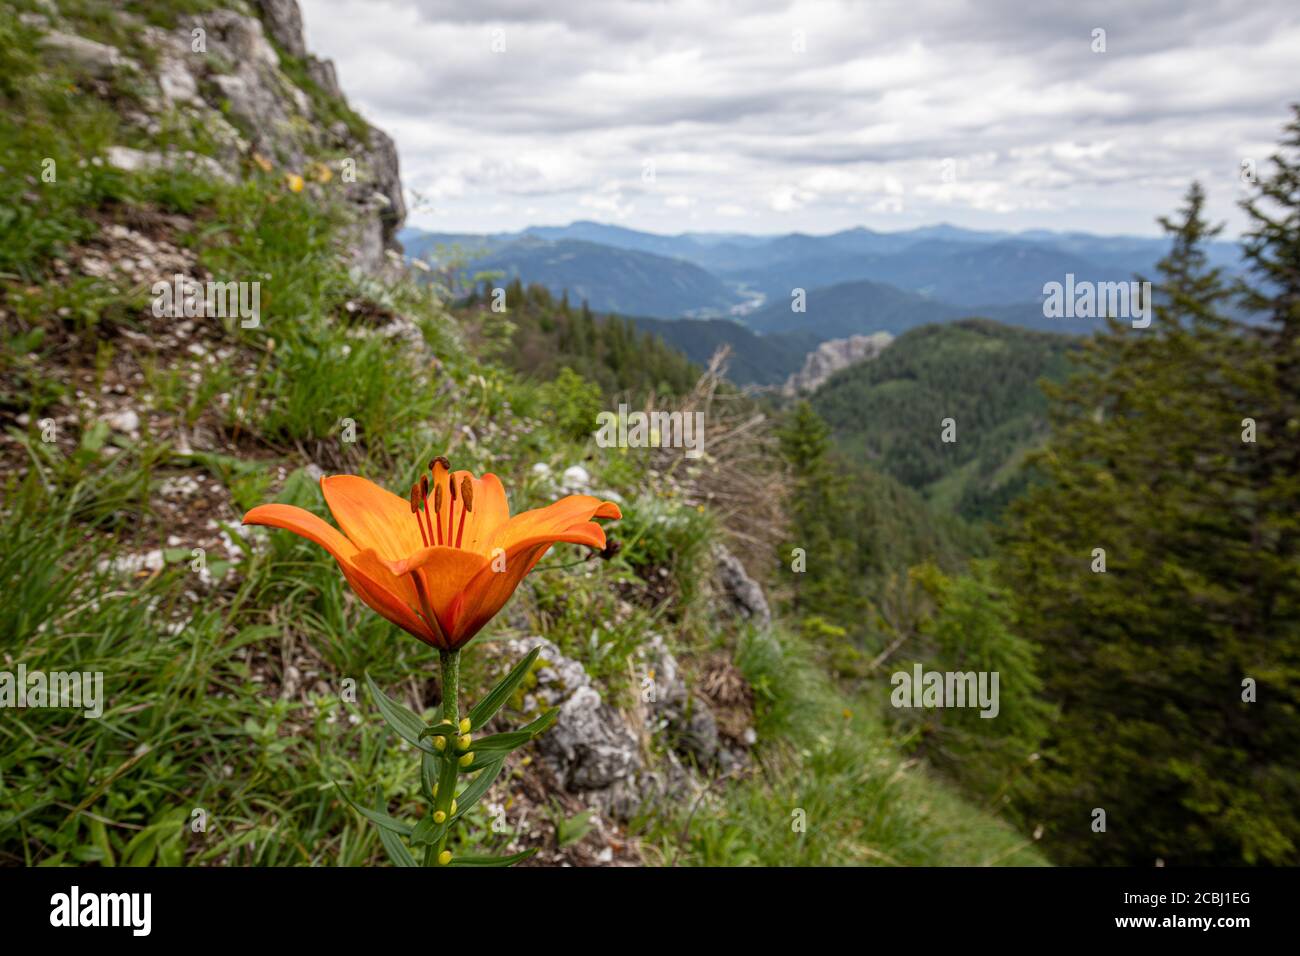 Orange lily in front of an alpine landscape in Lower Austria Stock Photo